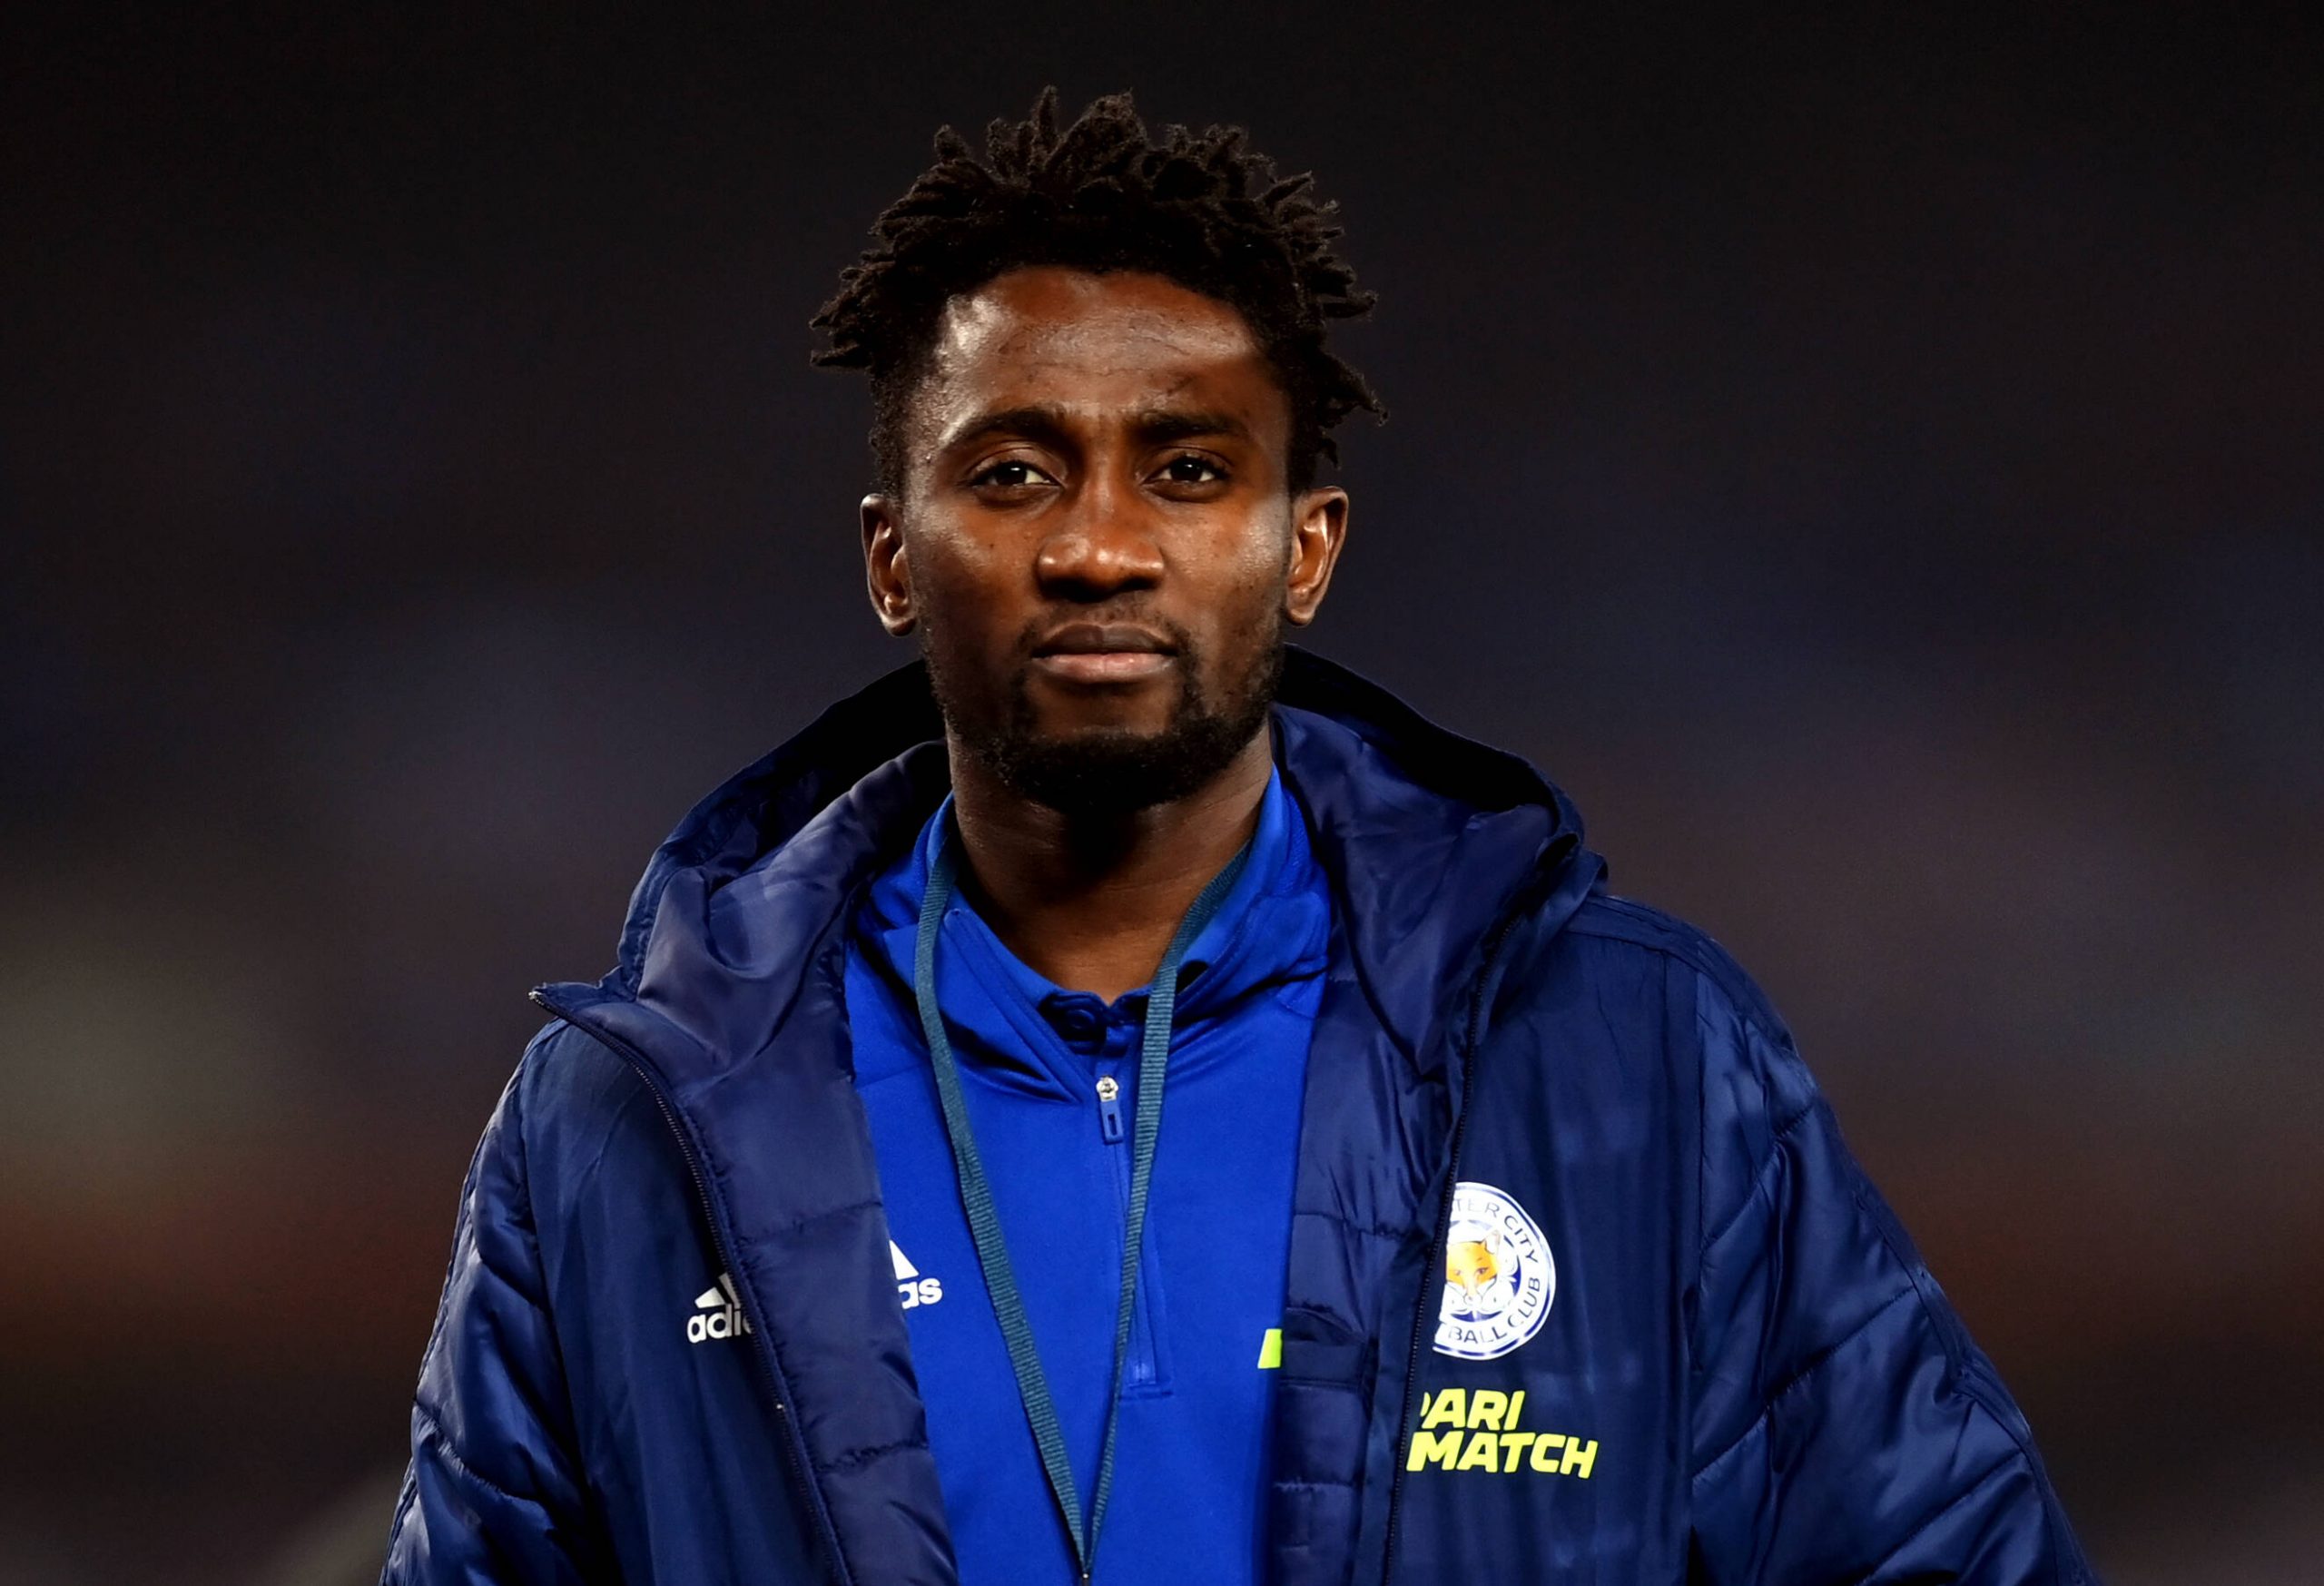 Ndidi has impressed for Leicester City and the Nigeria national team.